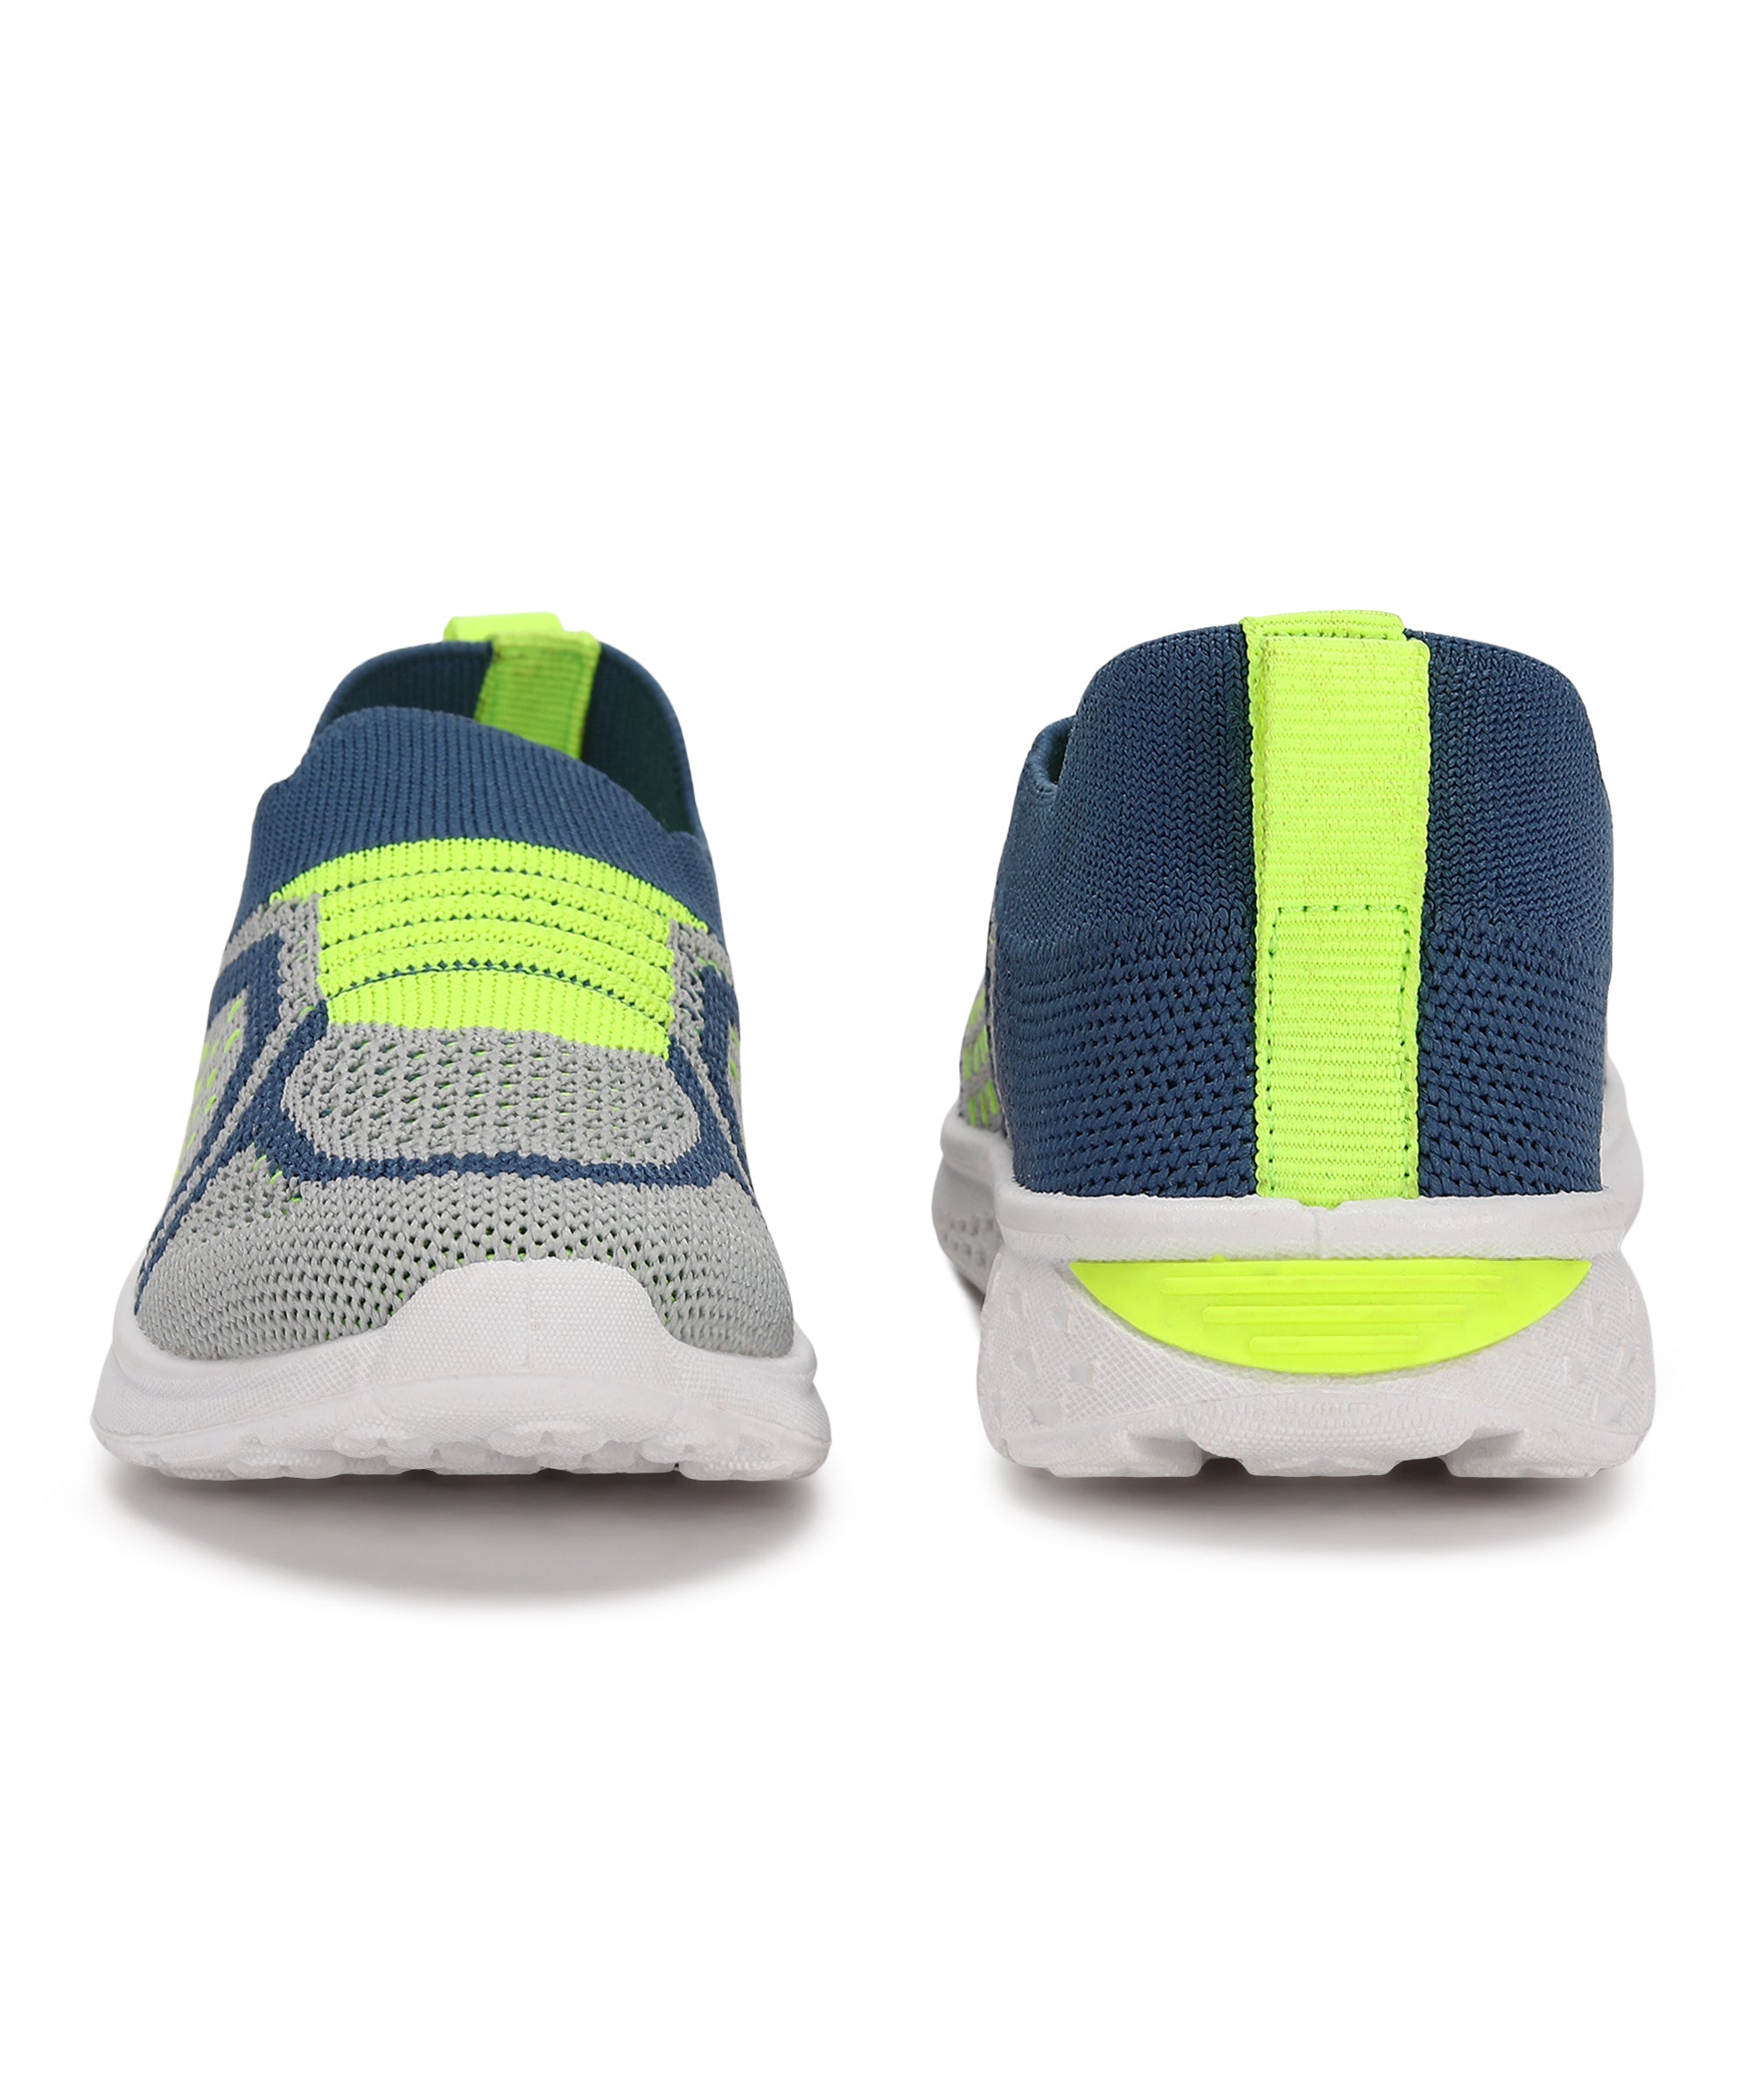 Paragon K8002C Kids Casual Fashion Shoes | Comfortable Trendy Shoes for Boys &amp; Girls